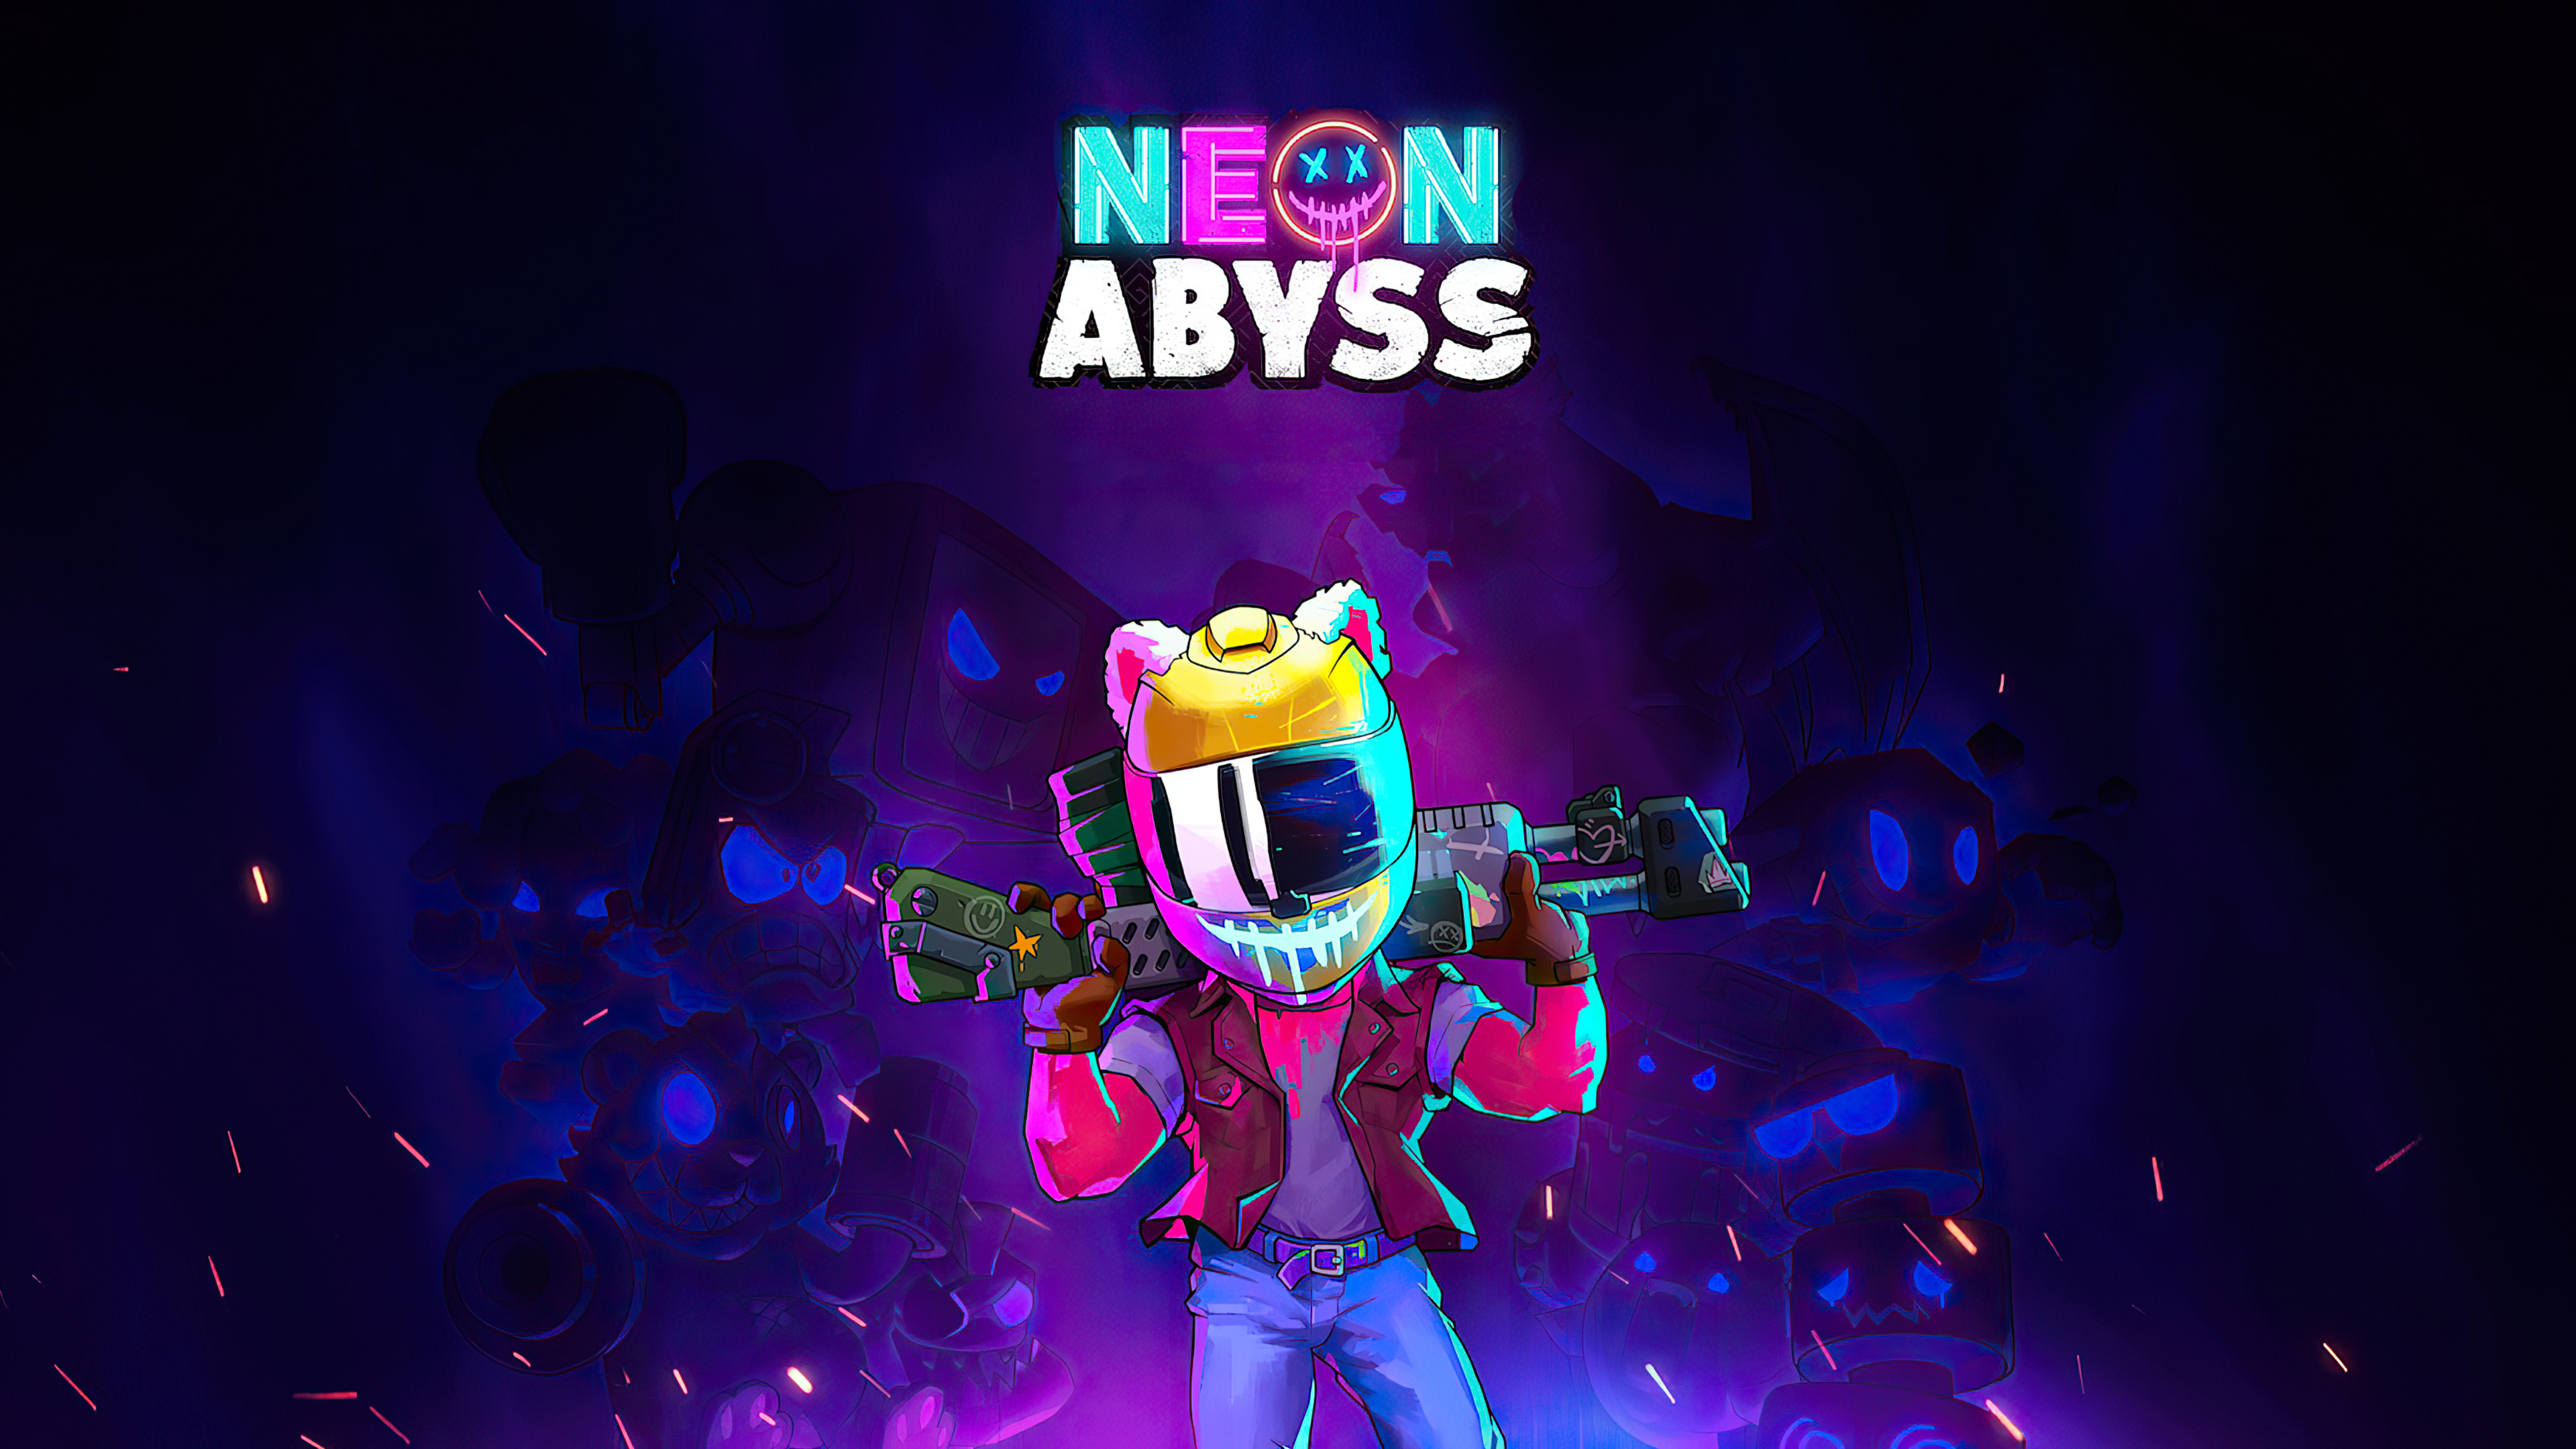 Neon abyss steam фото 72